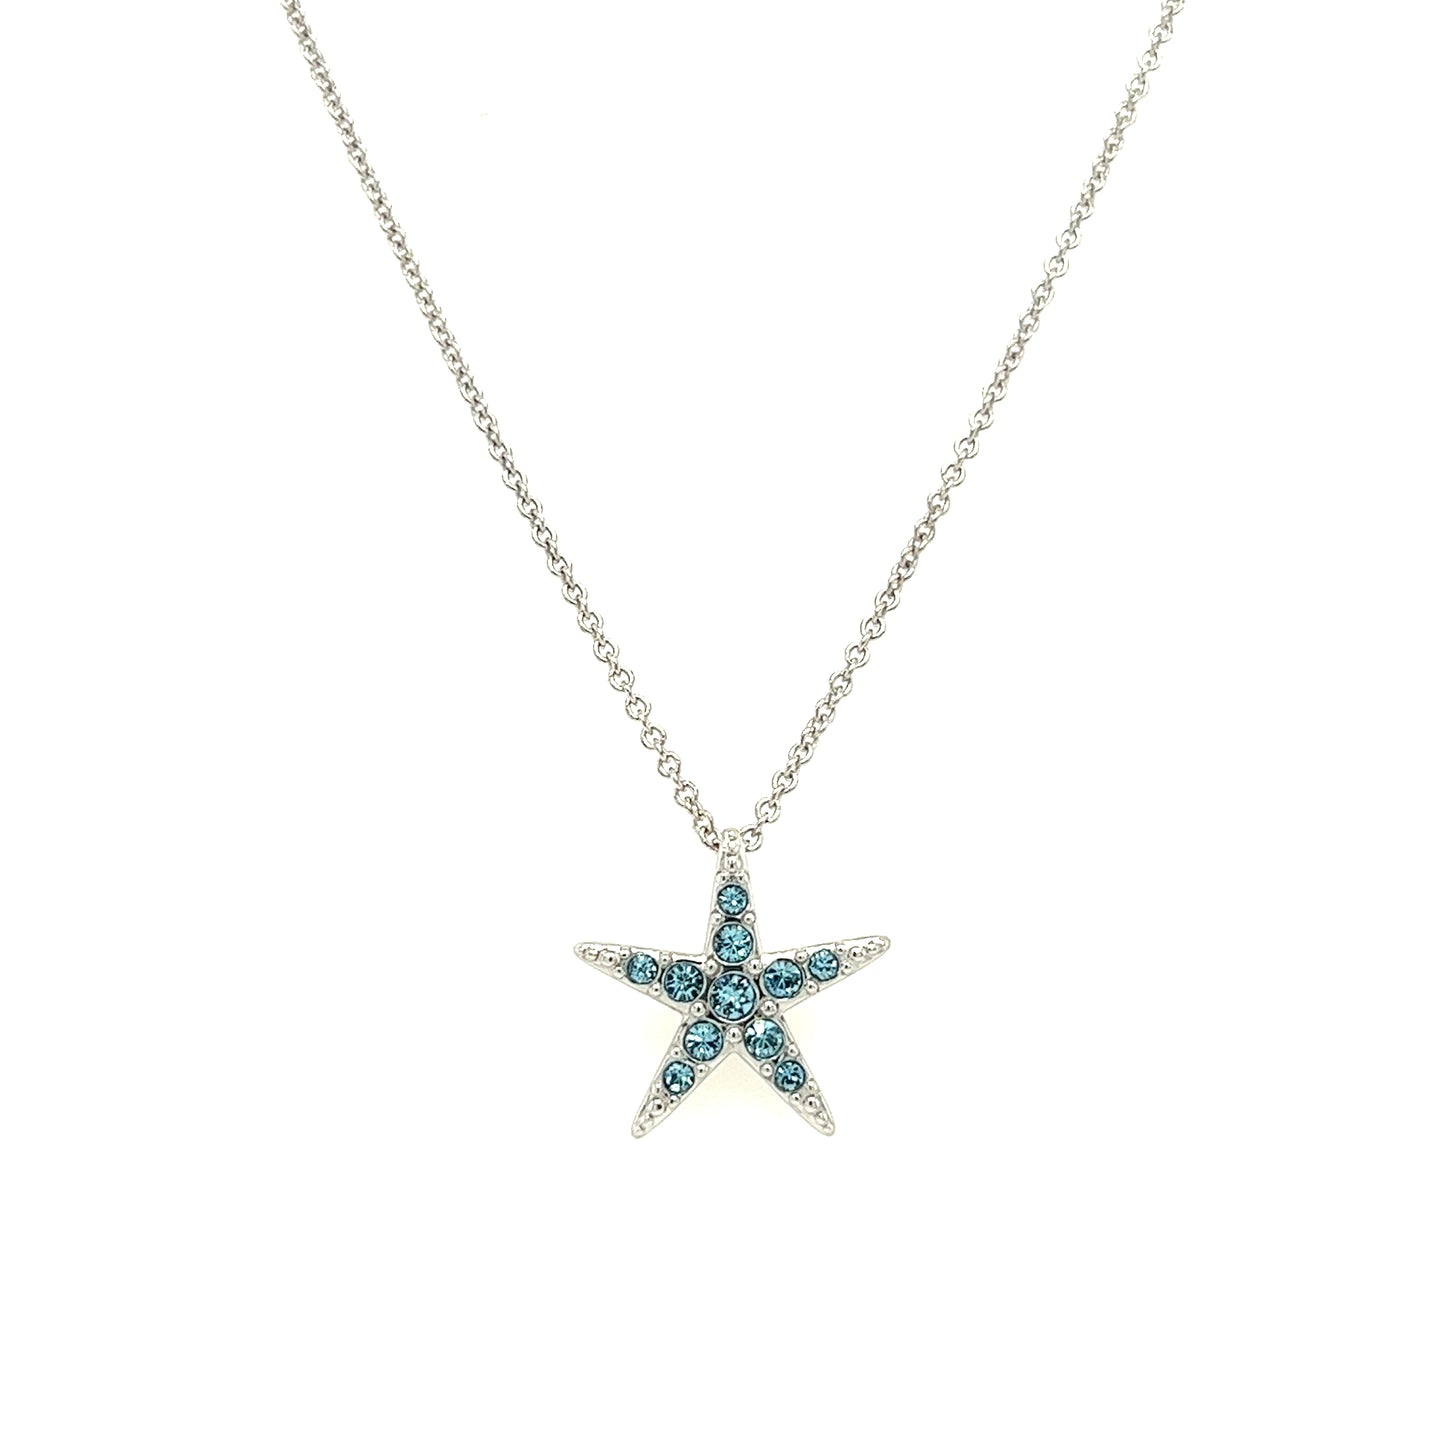 Starfish Necklace with Aqua Crystals in Sterling Silver Front View